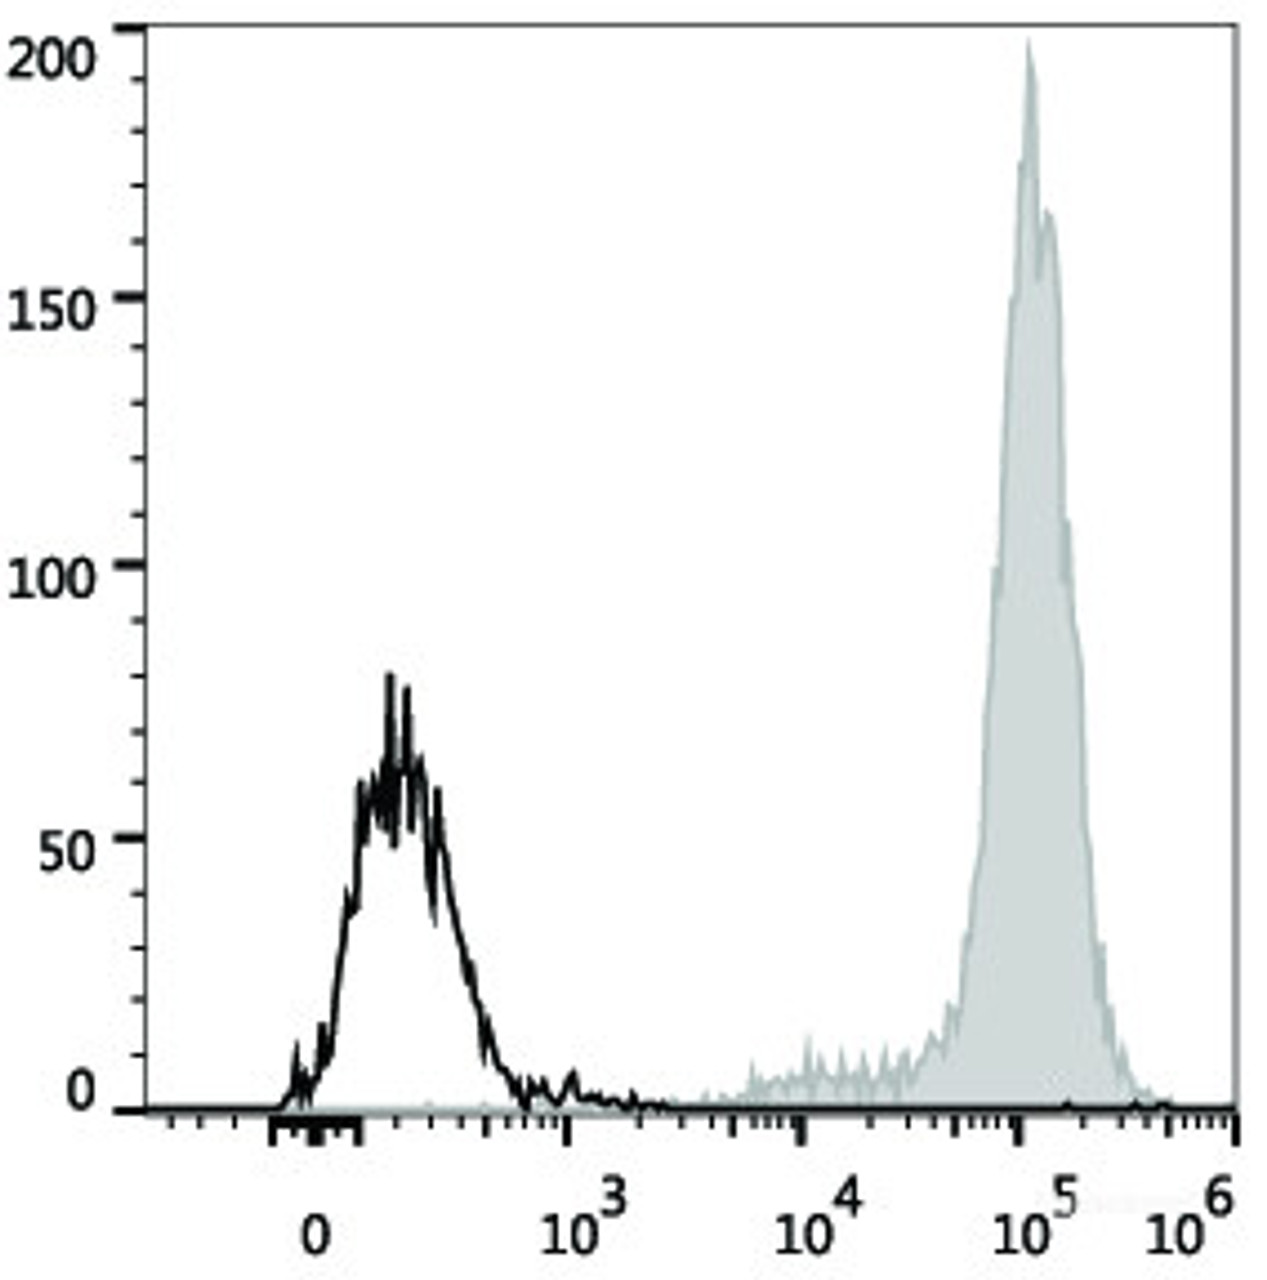 Human pheripheral blood monocytes are stained with PE/Cyanine7 Anti-Human CD14 Antibody(filled gray histogram). Unstained pheripheral blood monocytes (blank black histogram) are used as control.